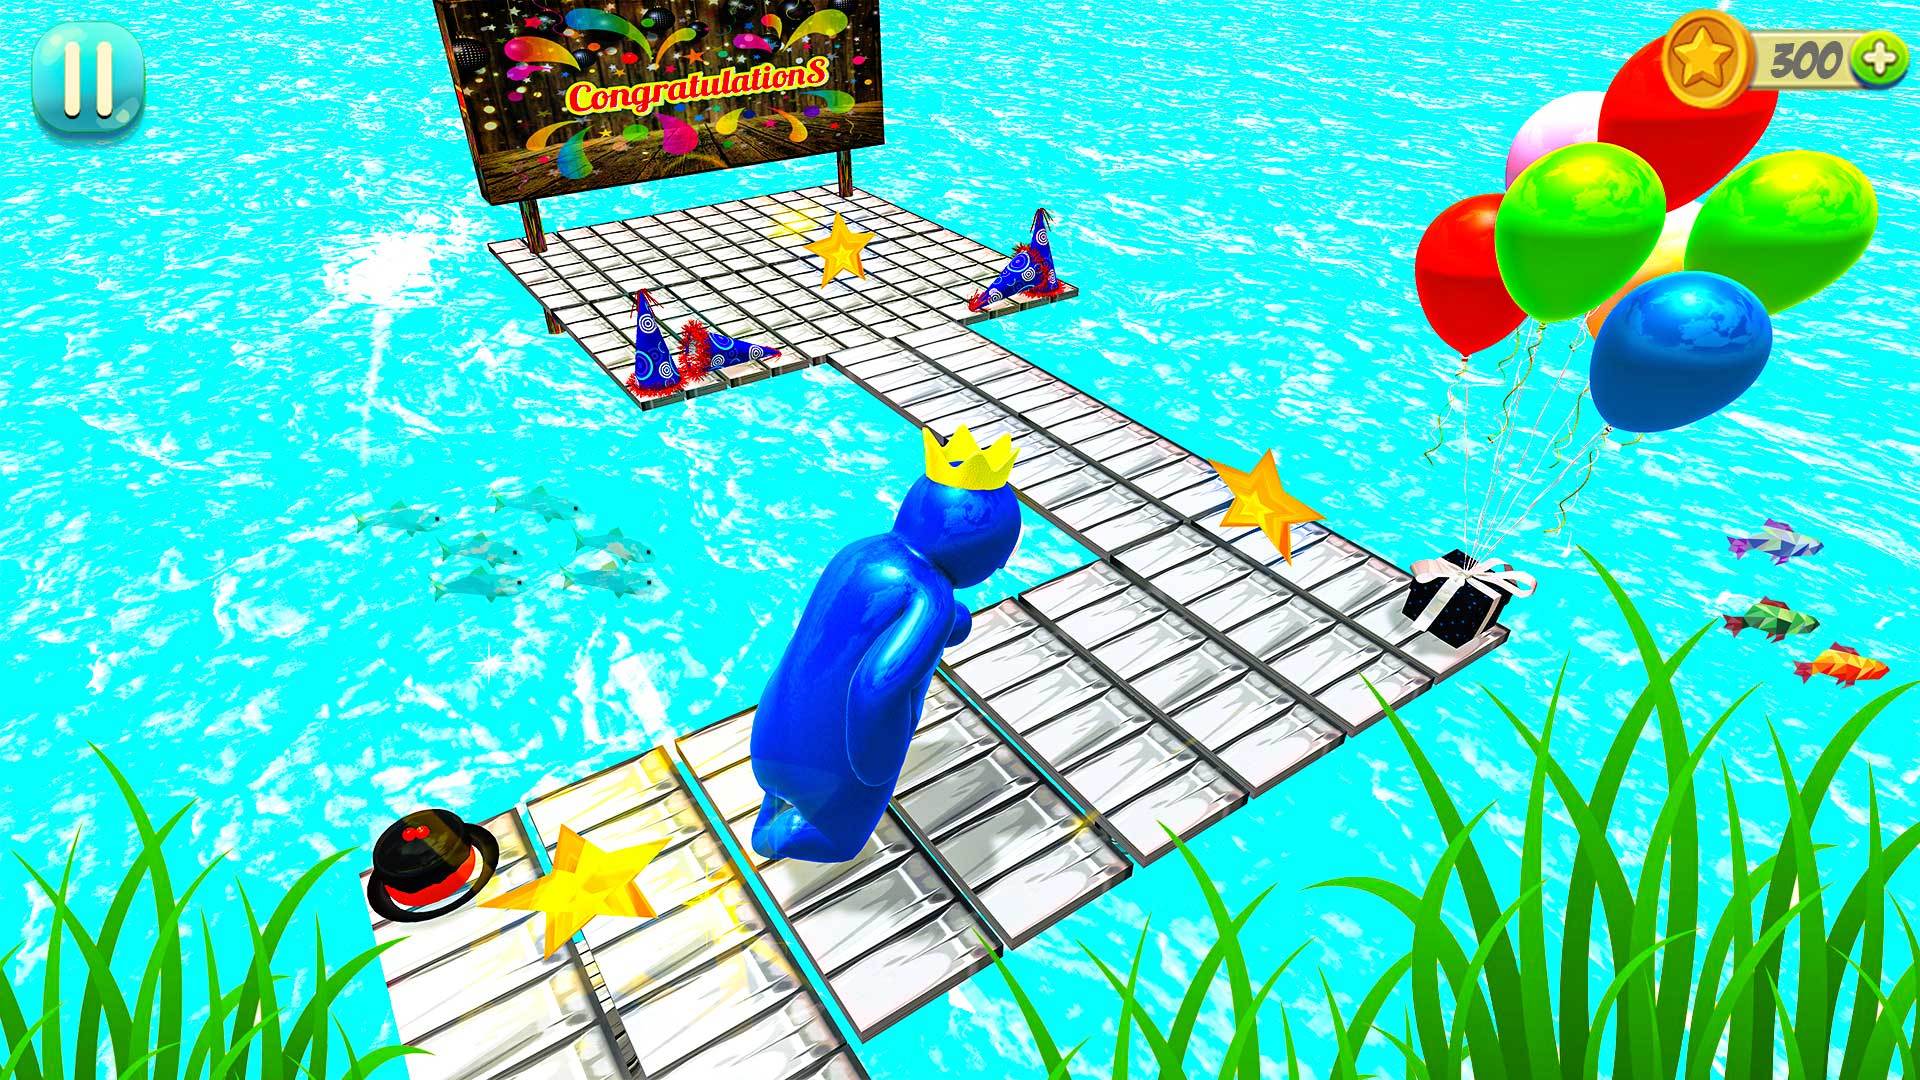 About: TEAL Rainbow Friends FNF MOD (Google Play version)